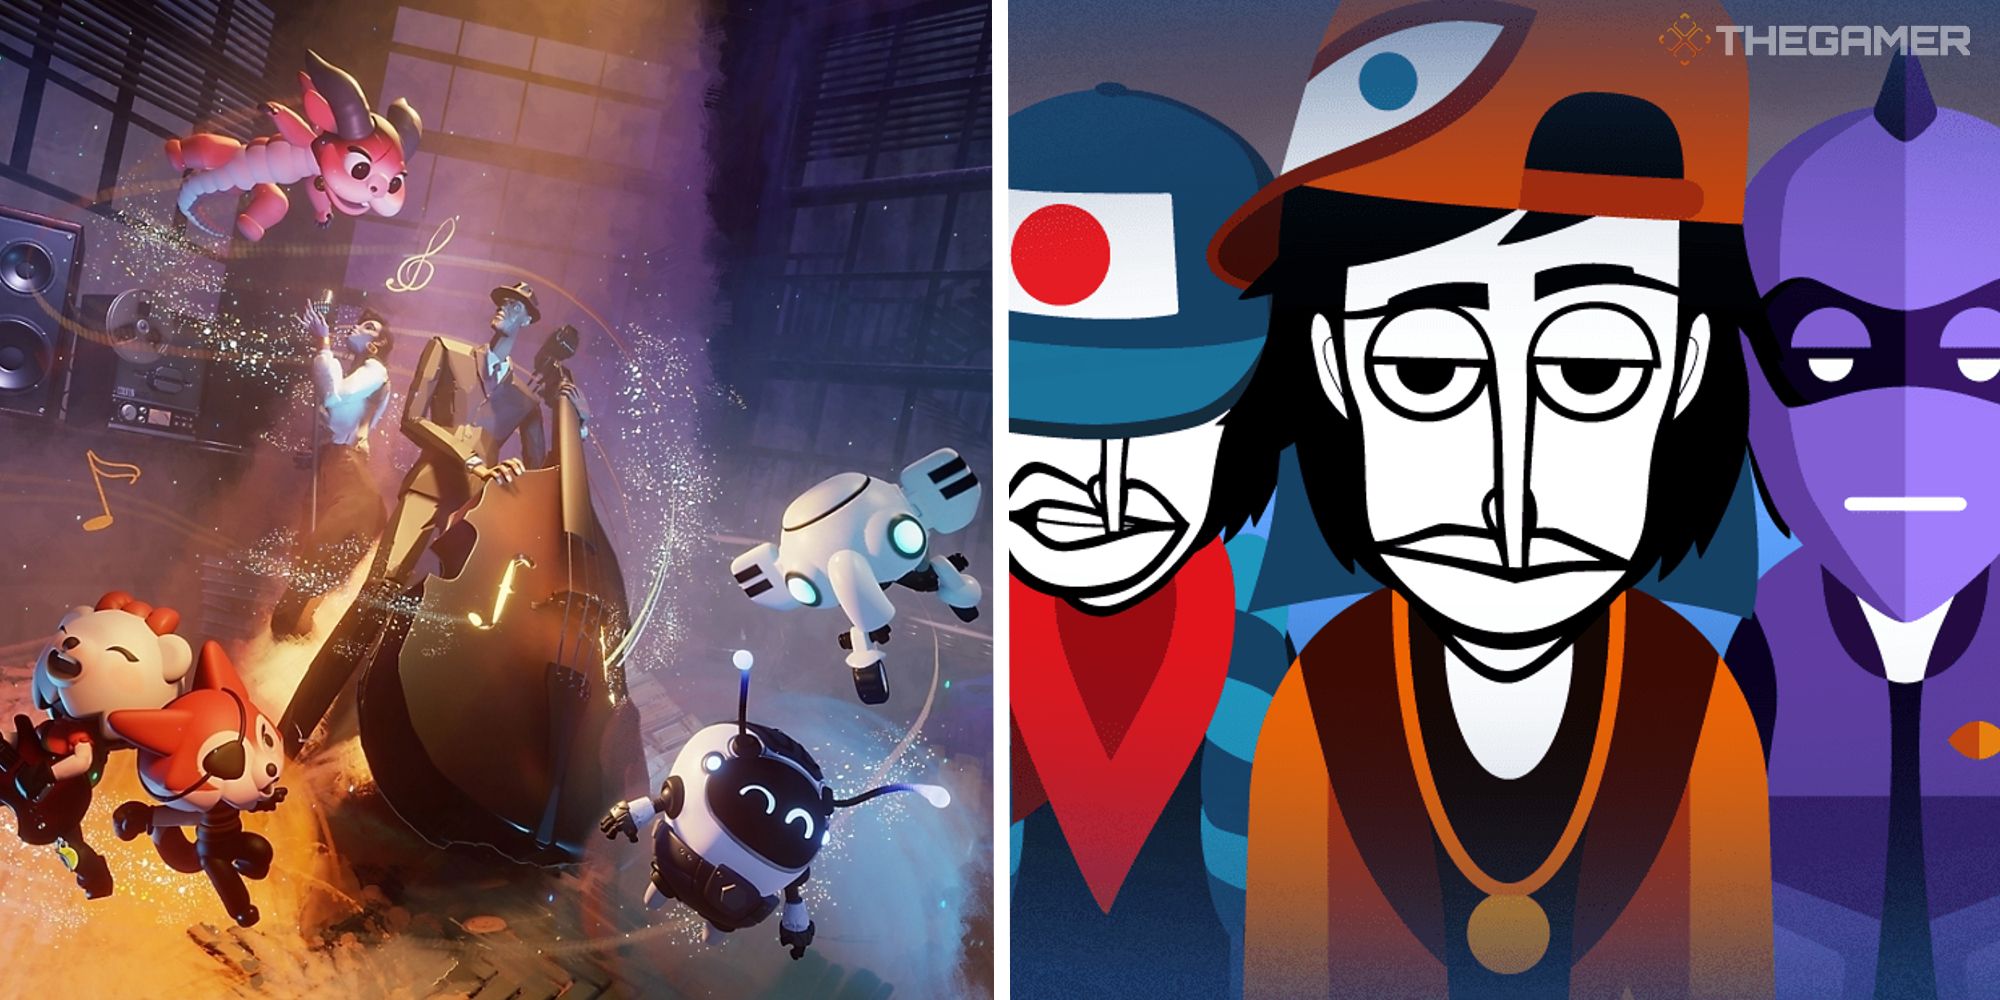 split image showing promotional material from dreams and incredibox